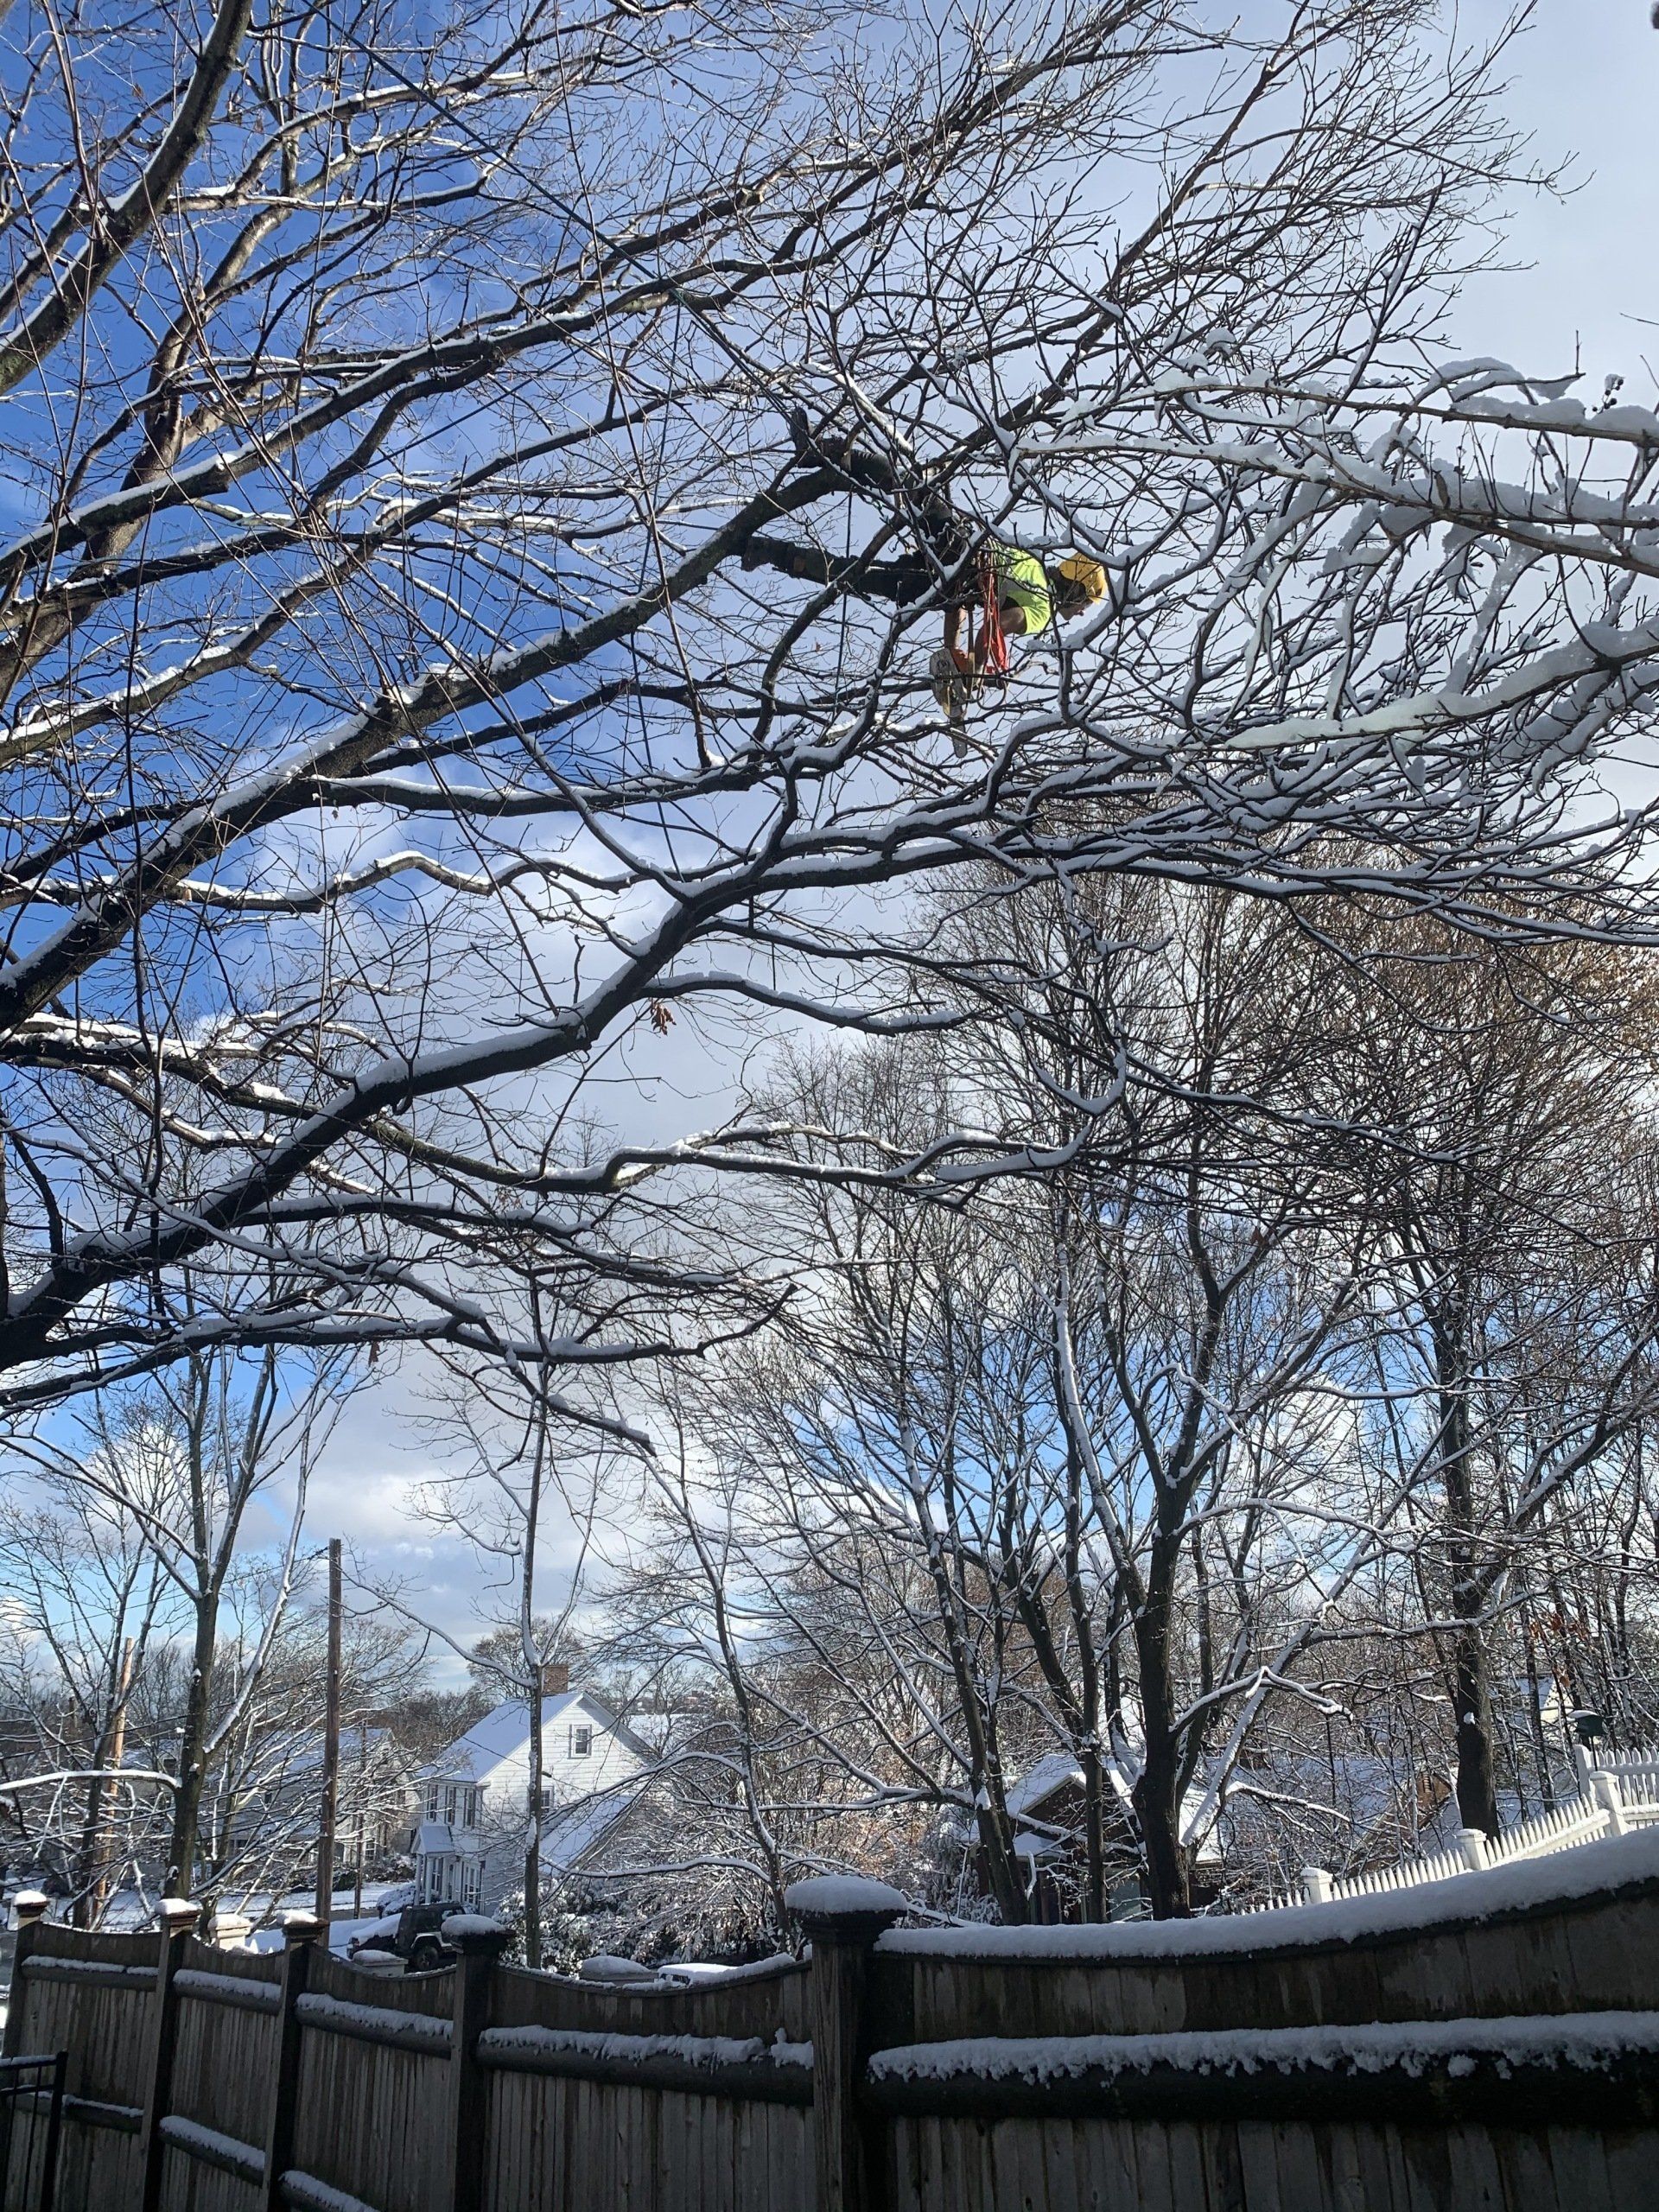 Tree Removal Hingham MA Arborist climbing and trimming a tree using proper reduction cuts